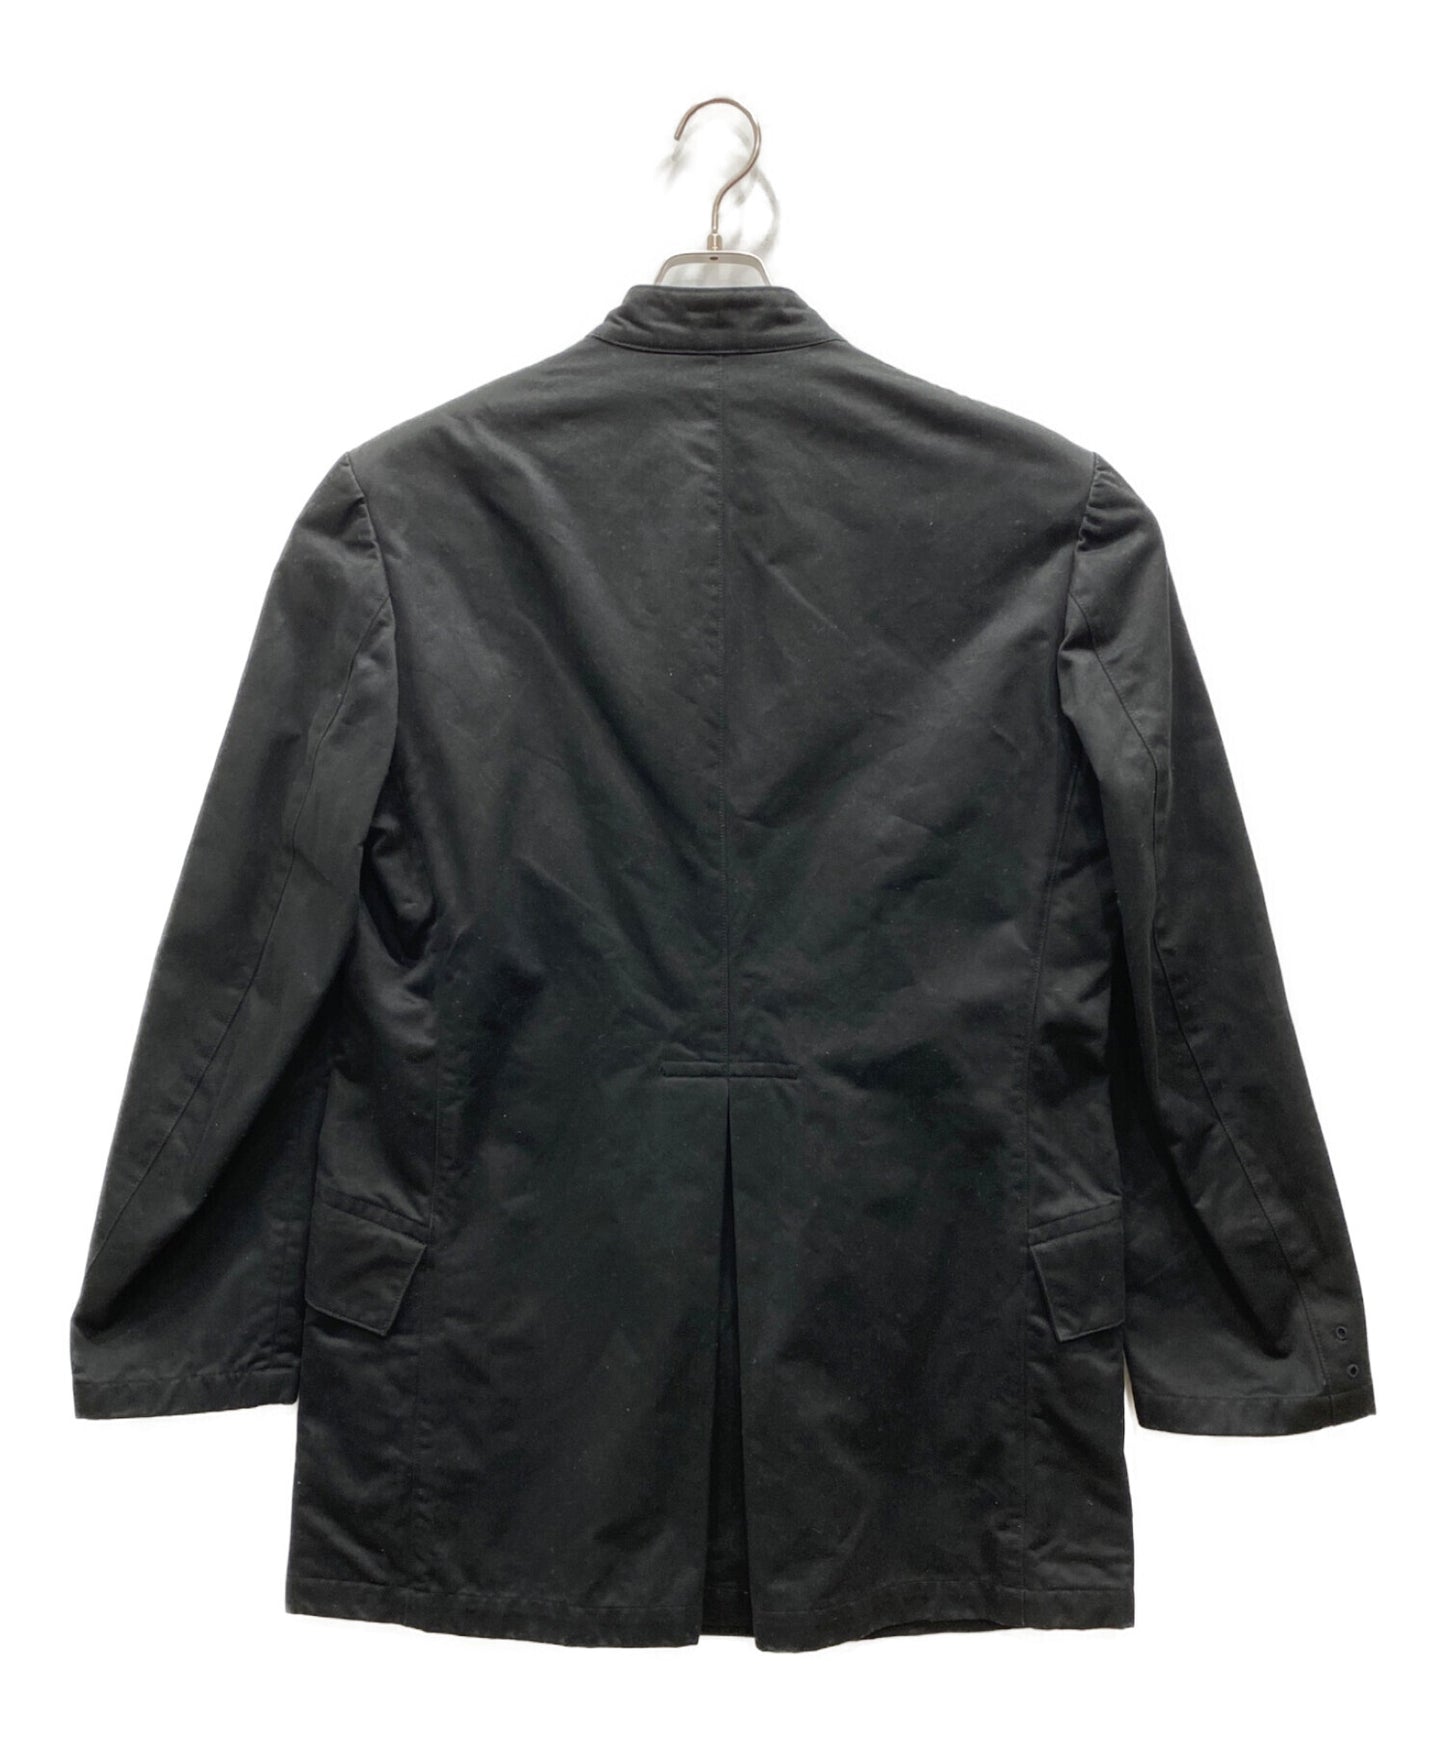 [Pre-owned] Yohji Yamamoto pour homme Oversized Jacket with Changeable Buttons HQ-J13-010